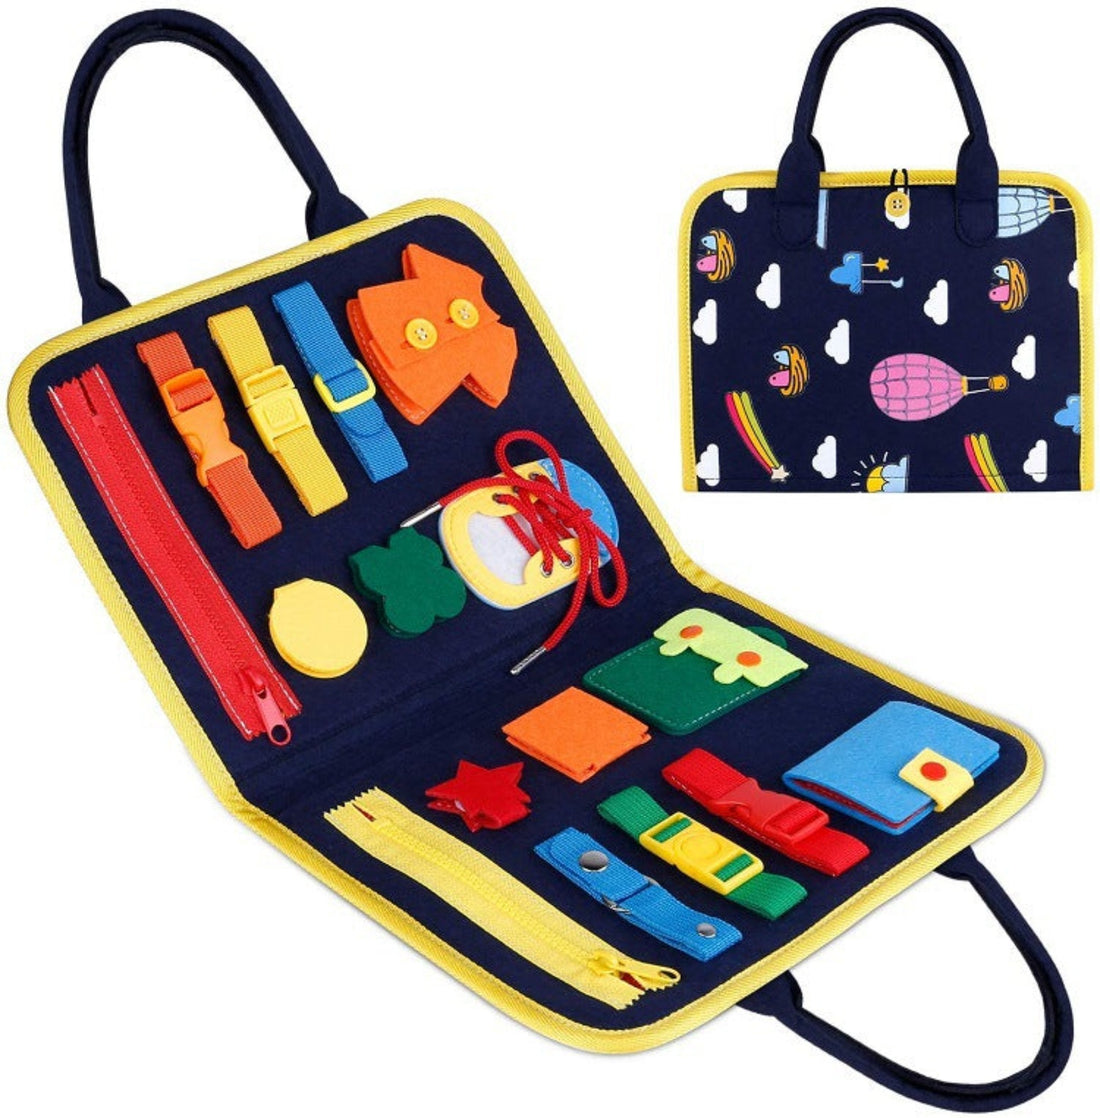 Child-safe learning toy for toddlers